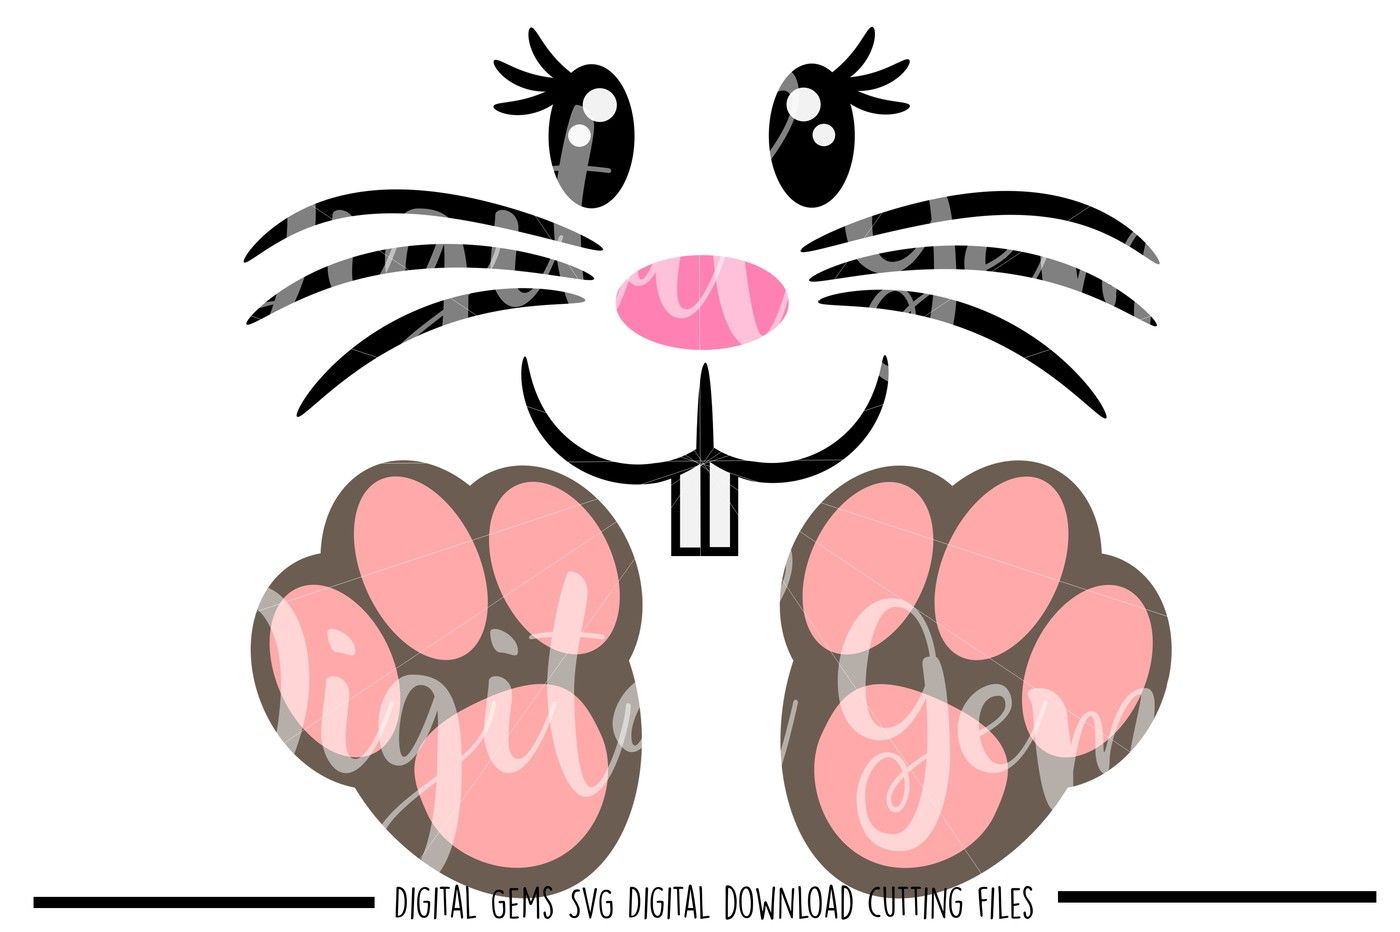 ori 48078 1373ac73f21a59835ce85bd50f4bbe0916155279 easter bunny face feet svg dxf eps png files